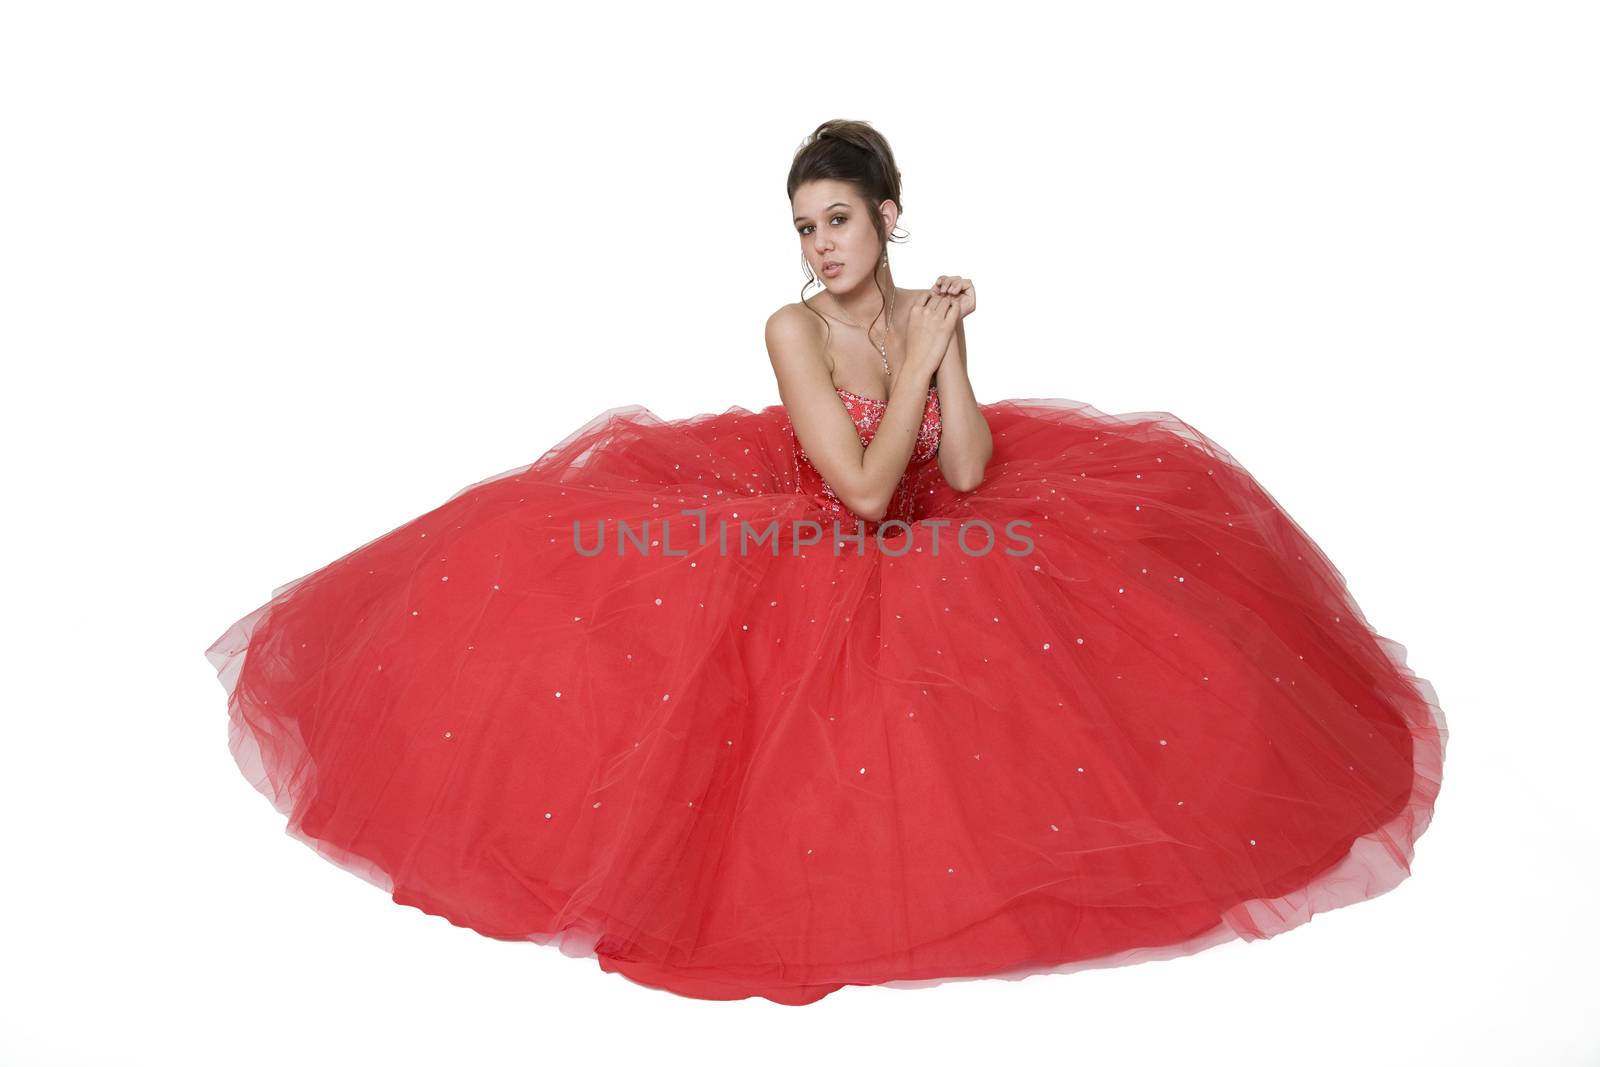 Teenage girl posing in her graduation/prom gown against a white background.